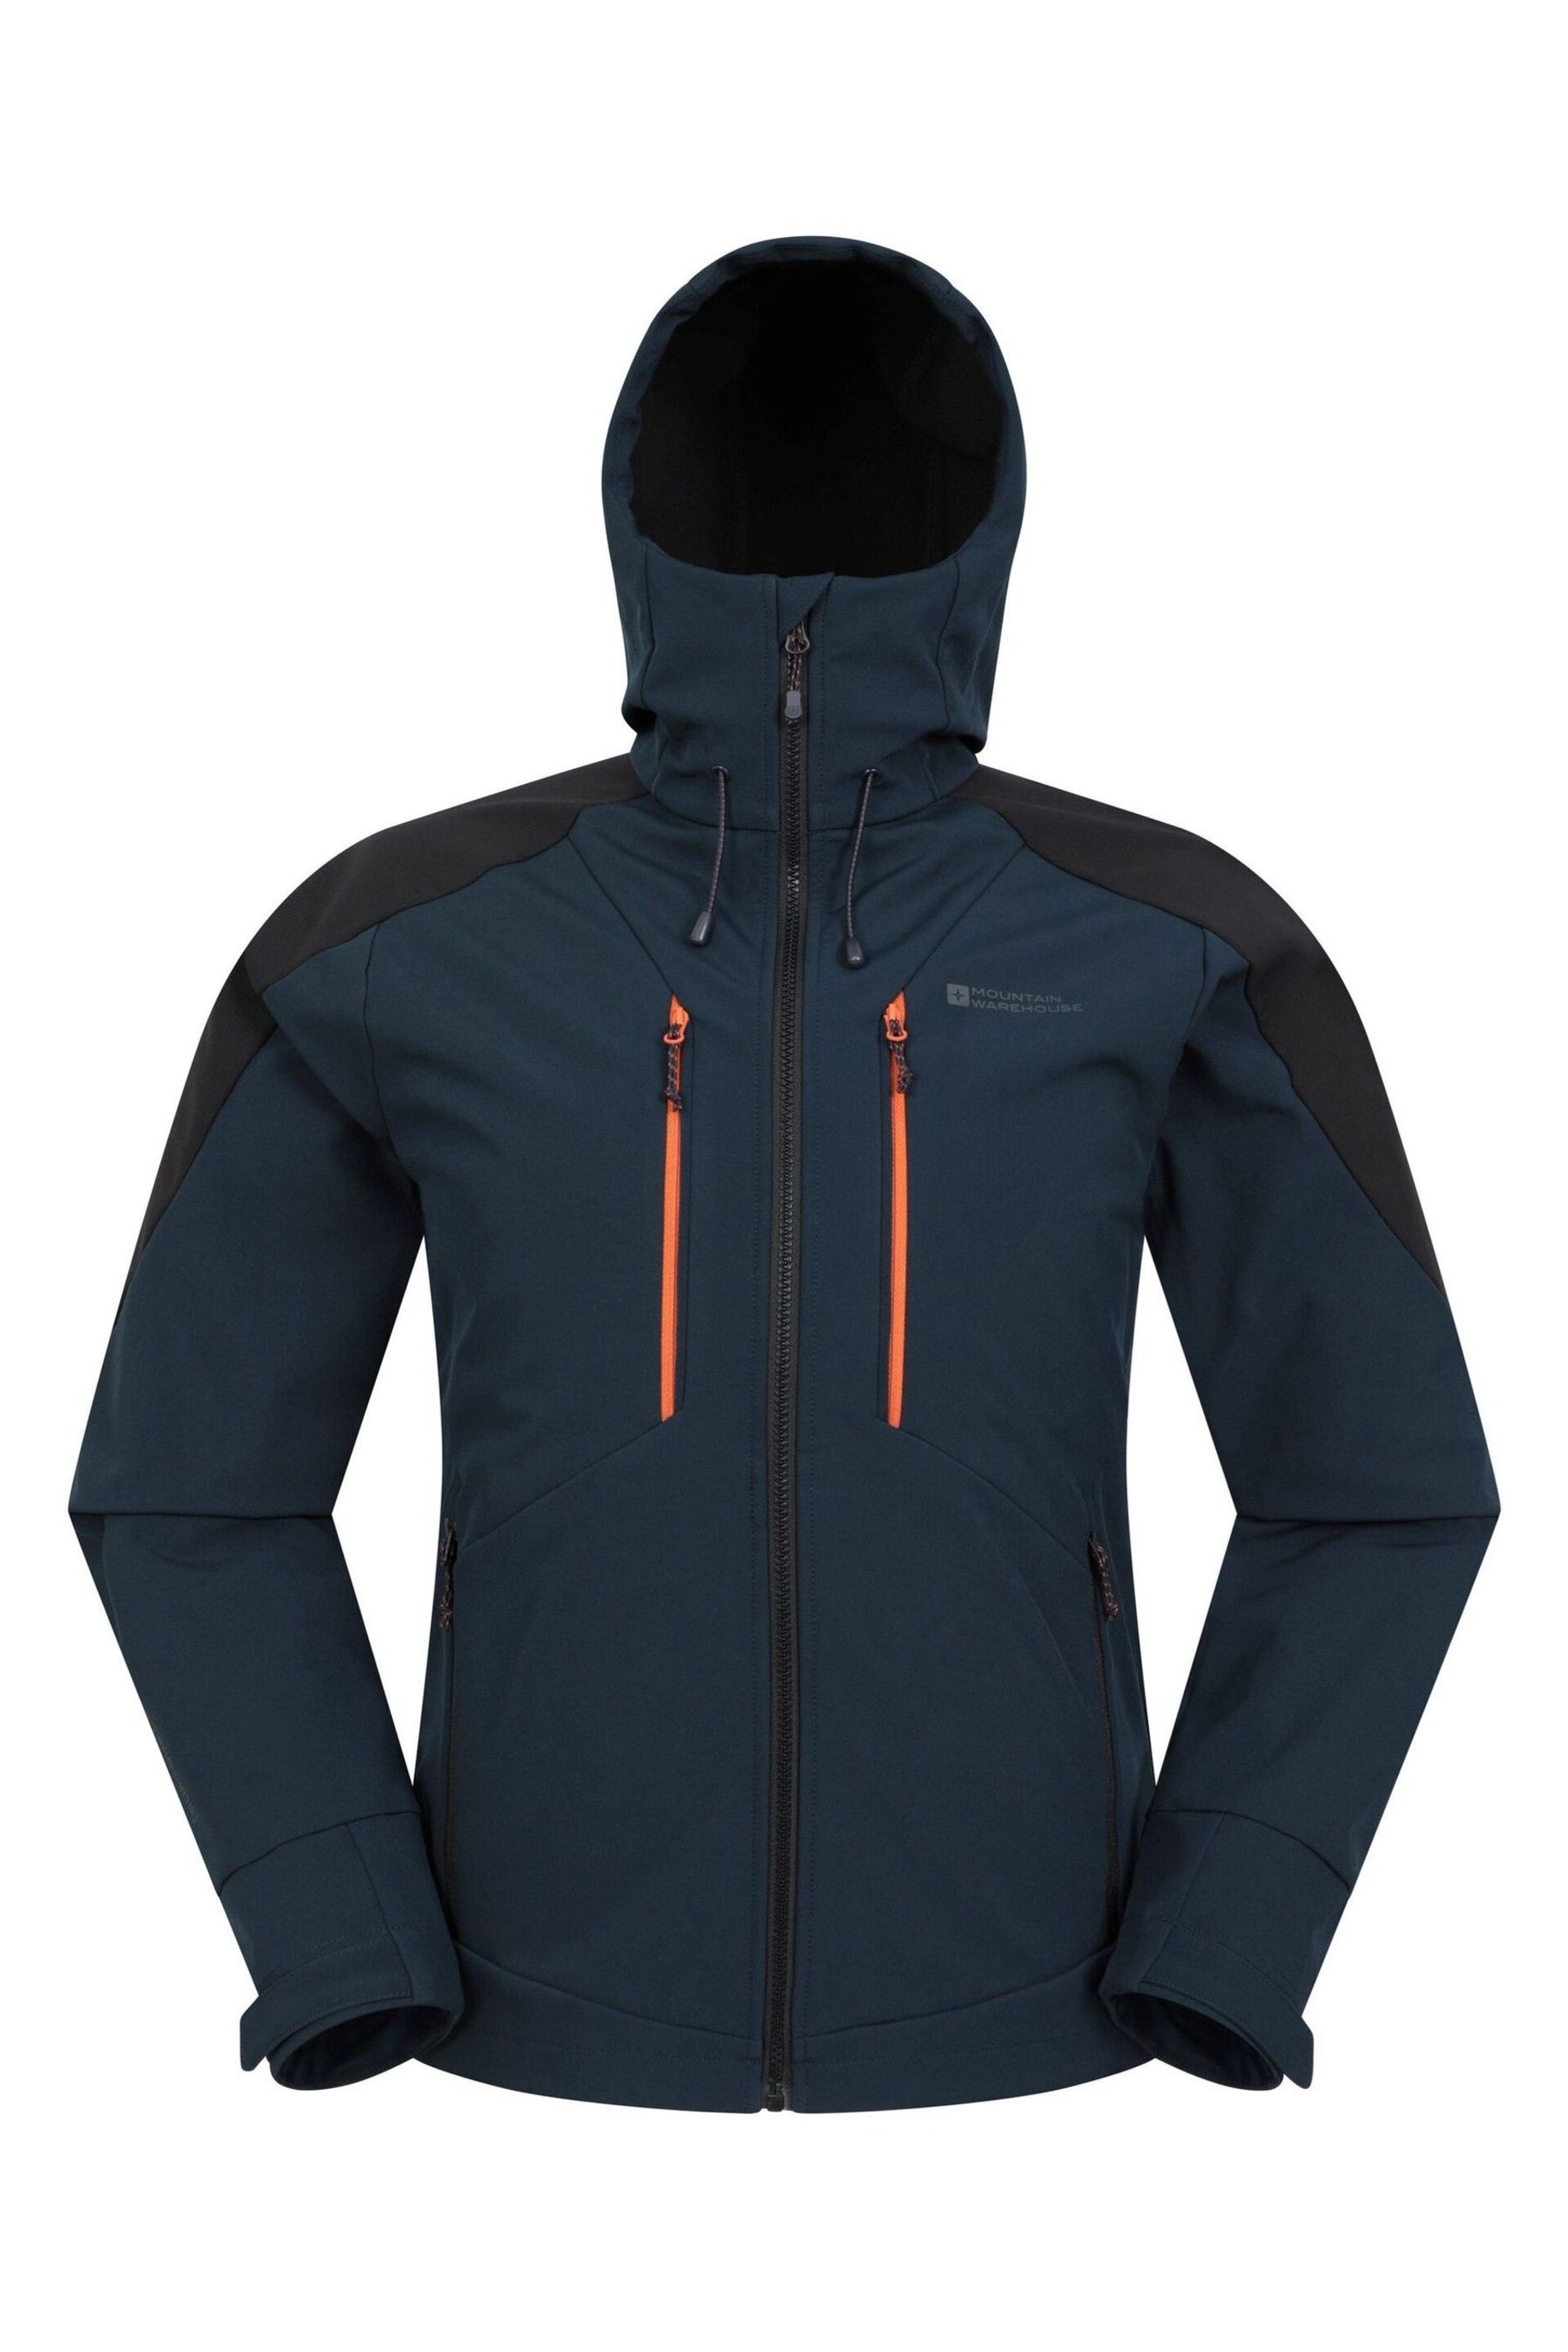 Mountain Warehouse Blue Navy Recycled Radius Water Resistant Softshell Jacket - Image 1 of 5